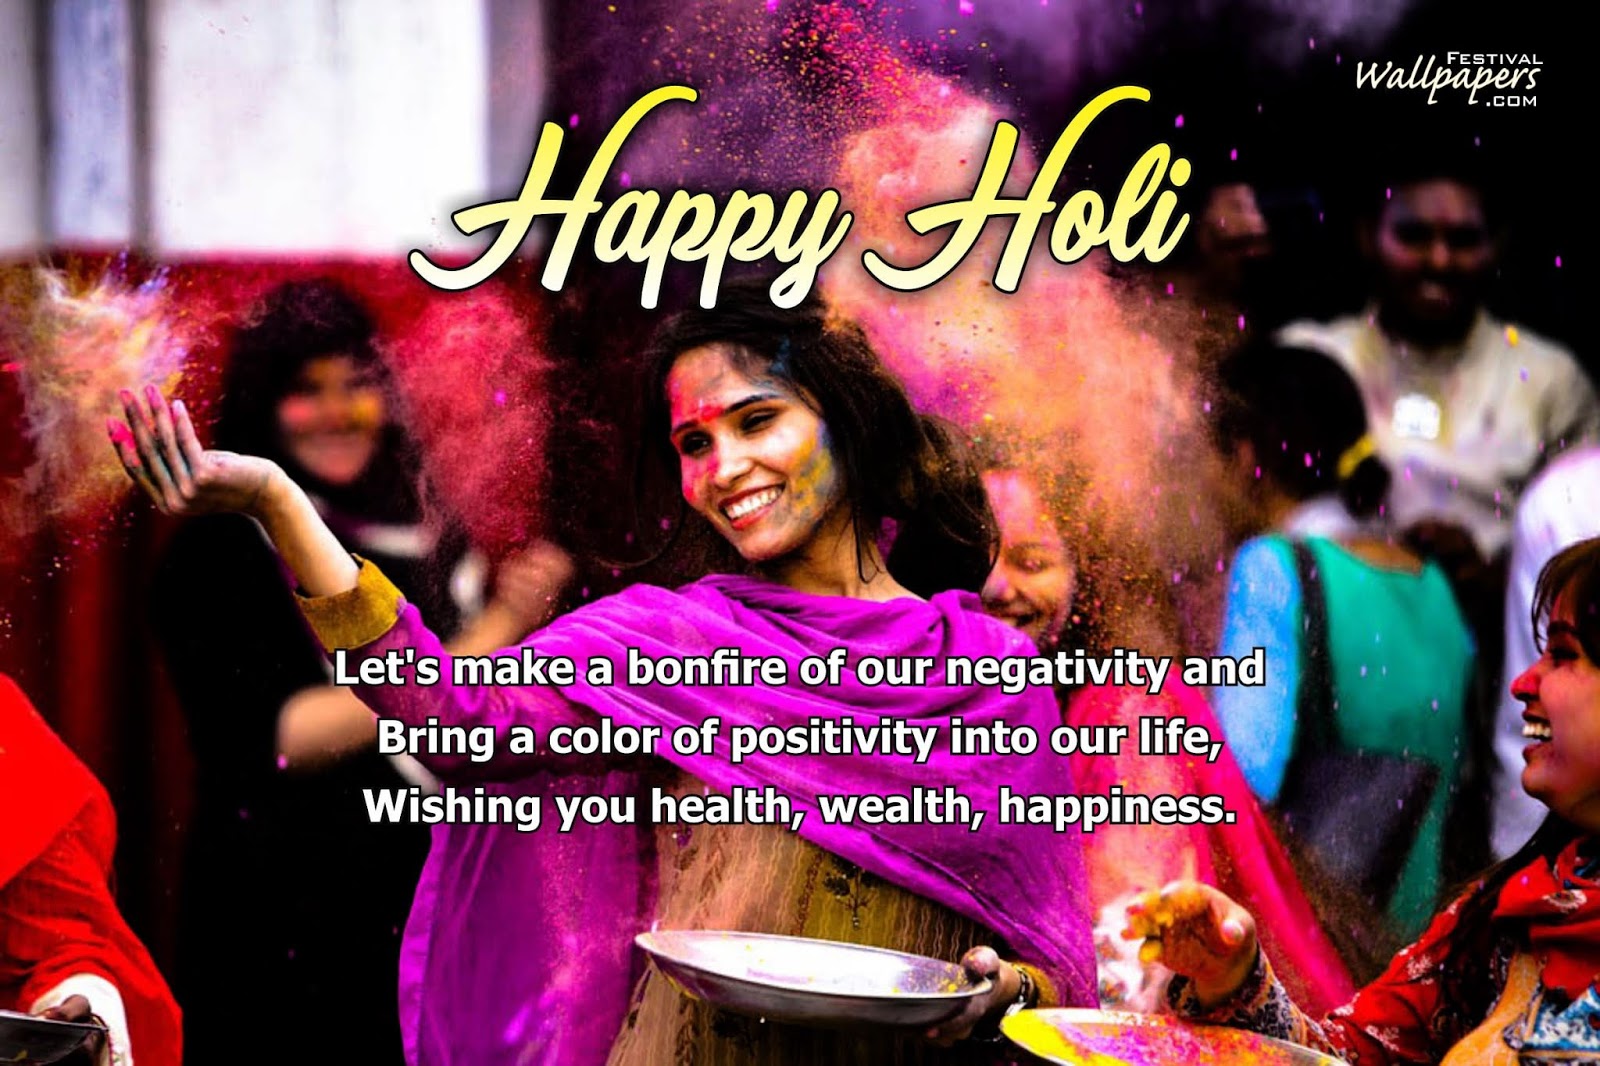 10 Best Happy Holi Wishes Images And Wallpapers For - English Lines Holi Festival 5 To 10 - HD Wallpaper 